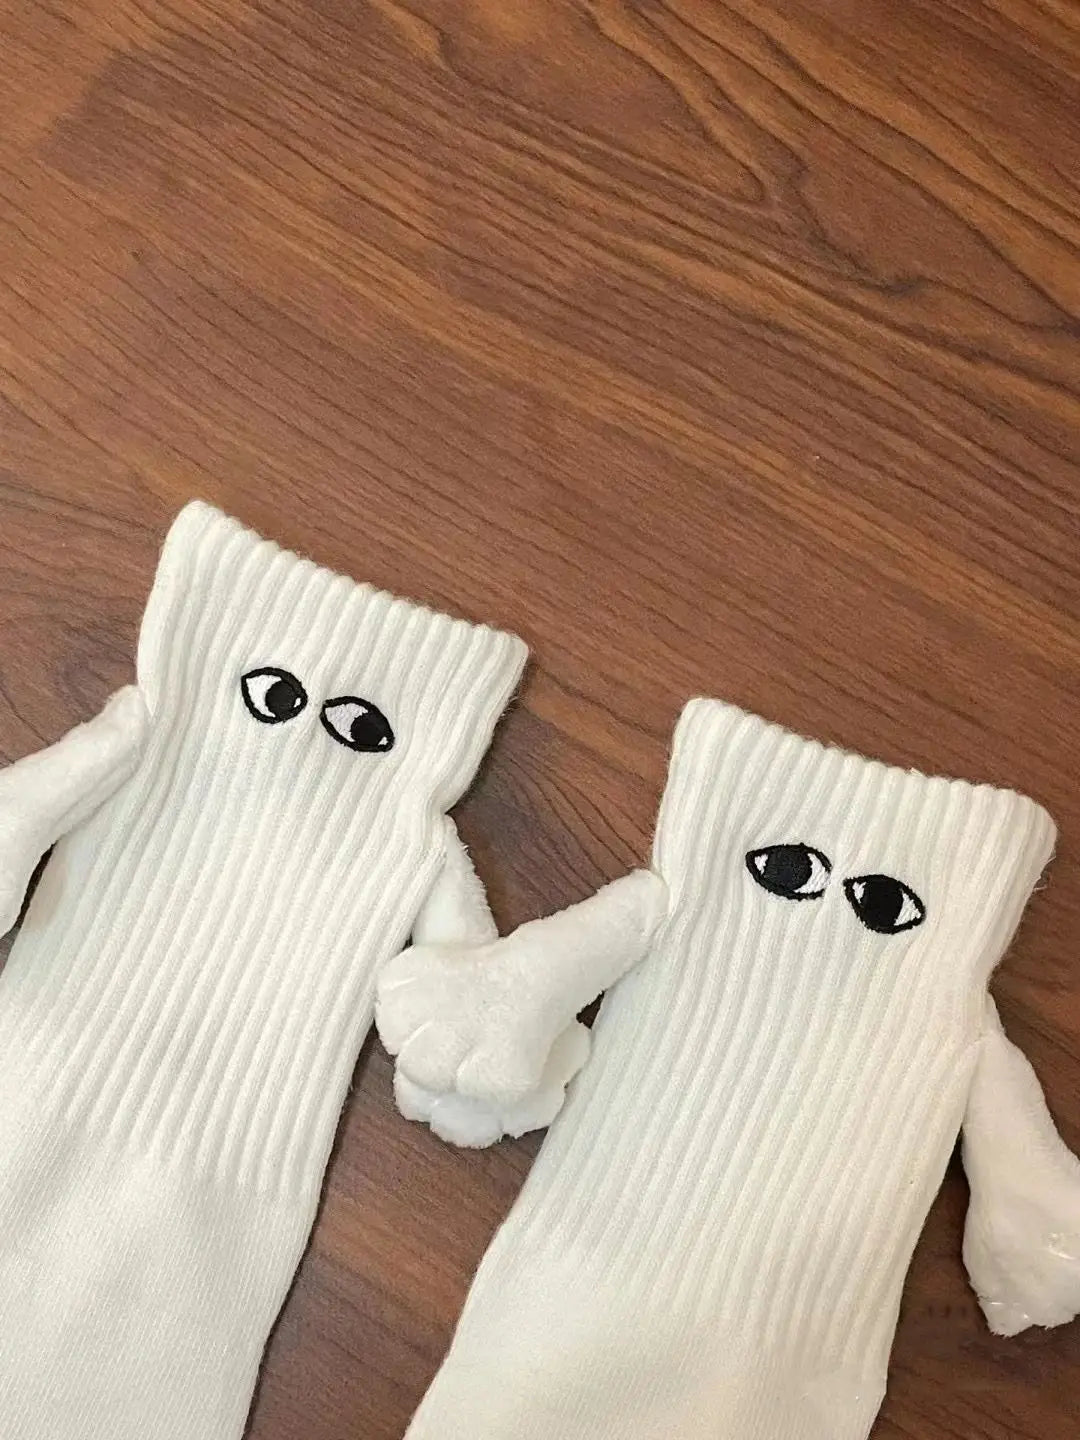 Magnetic Suction Hand In Couple Socks